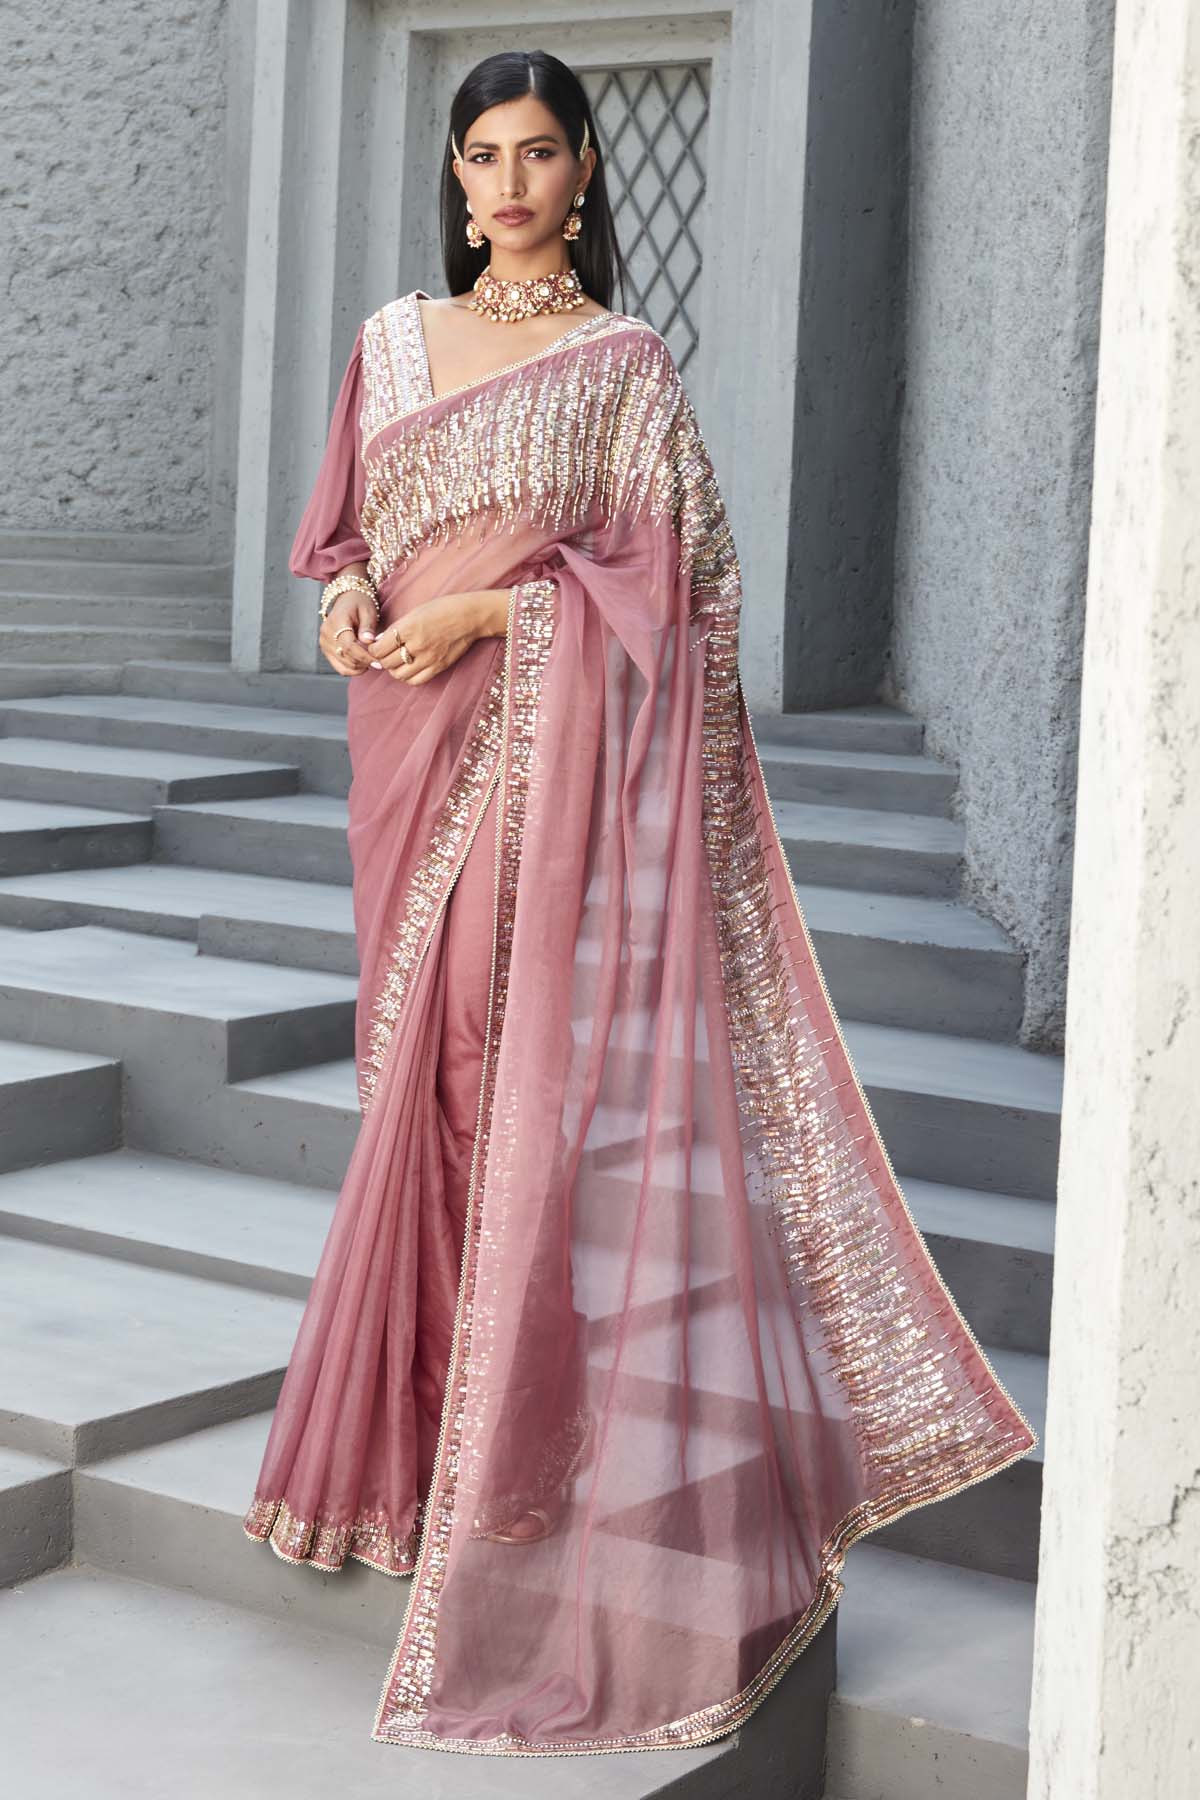 Designer Ranian Rose pink organza printed saree and blouse with cutdana, pipe, stone and sequins embroidery, reglan puff sleeves, butter crepe lining, back hook and v-neck For women Online at ScrollnShops